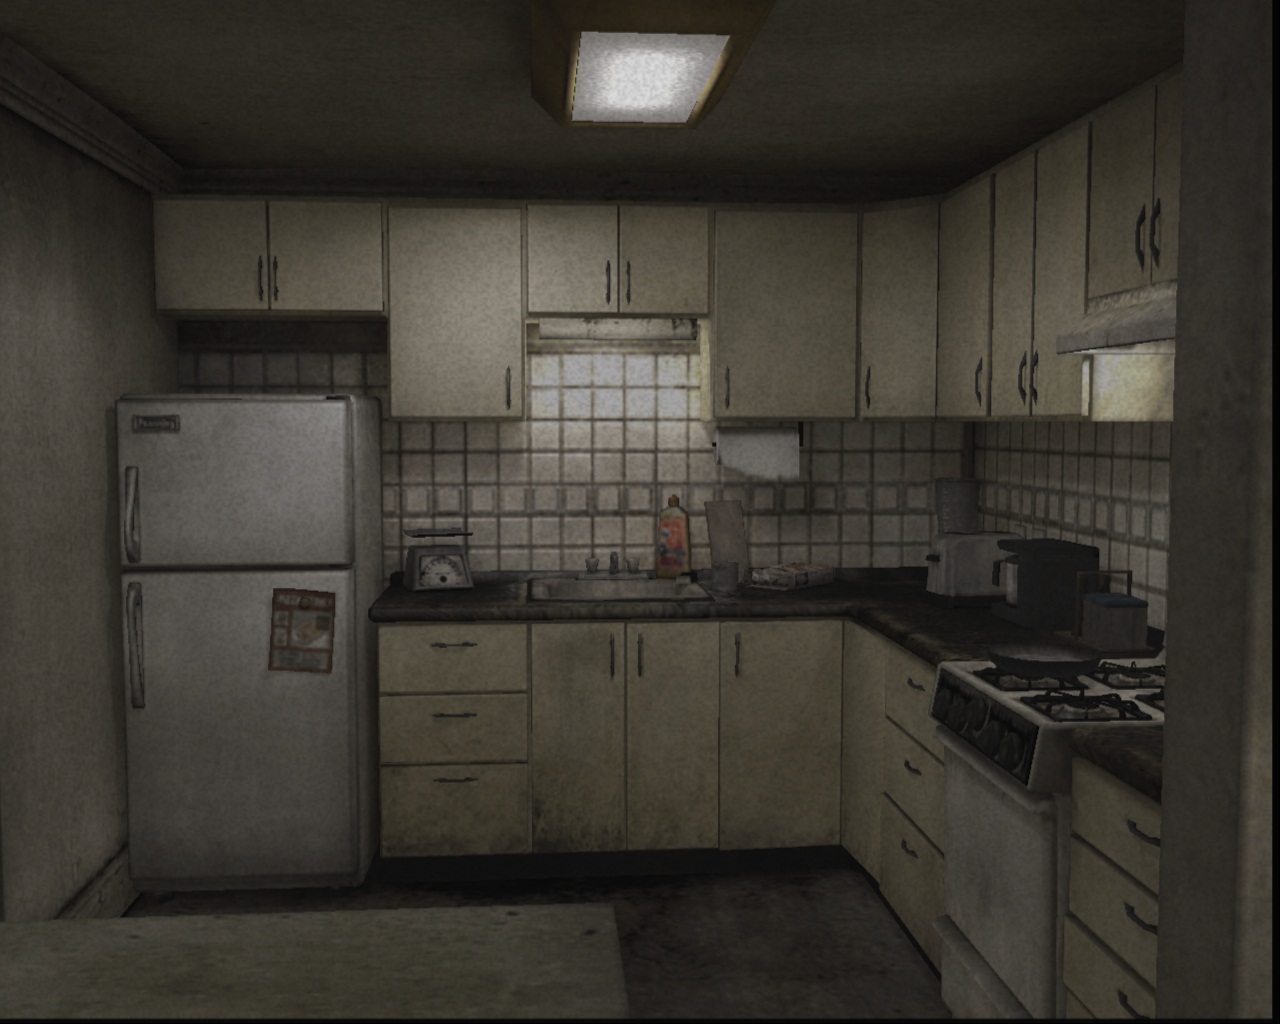 Silent Hill 4 Remaster 4K Textures - Ray Tracing GI - 2K4K